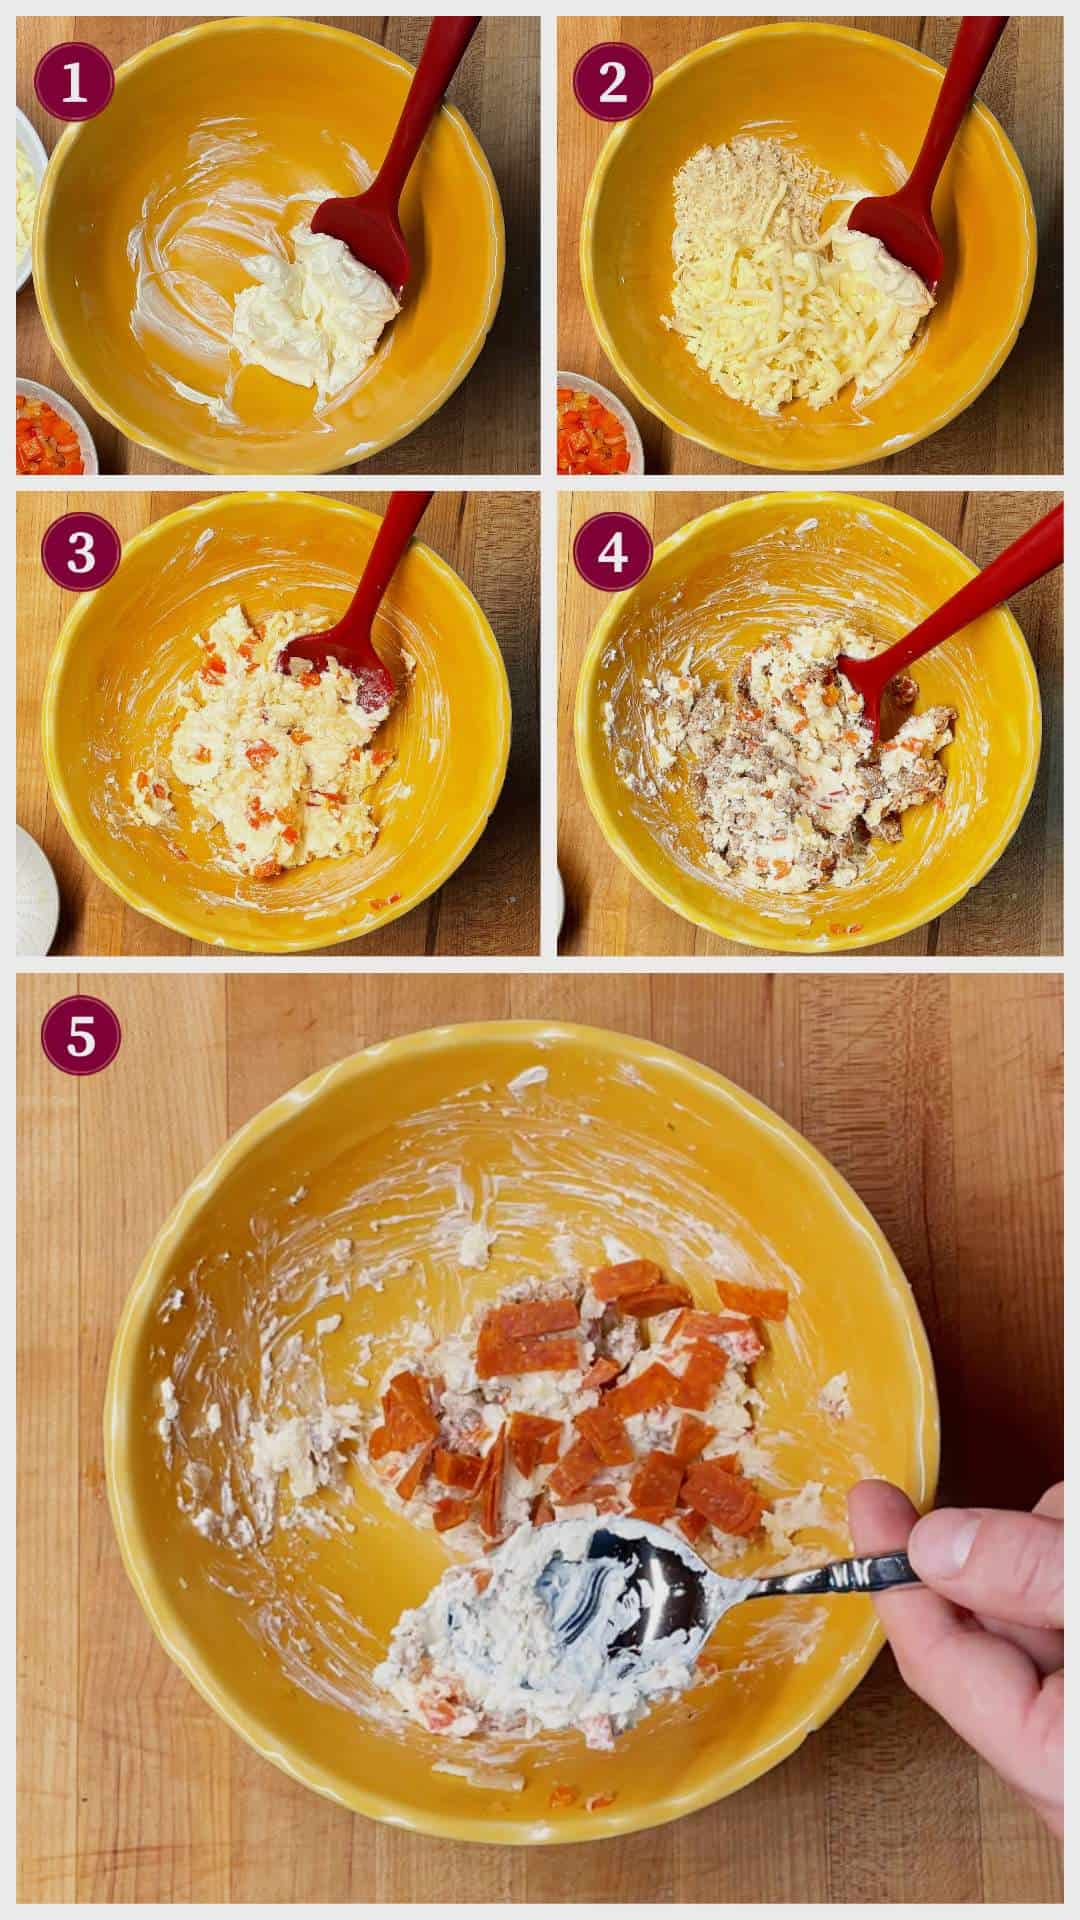 A collage of images showing how to mix up the filling for witch hat calzones, steps 1 - 5.